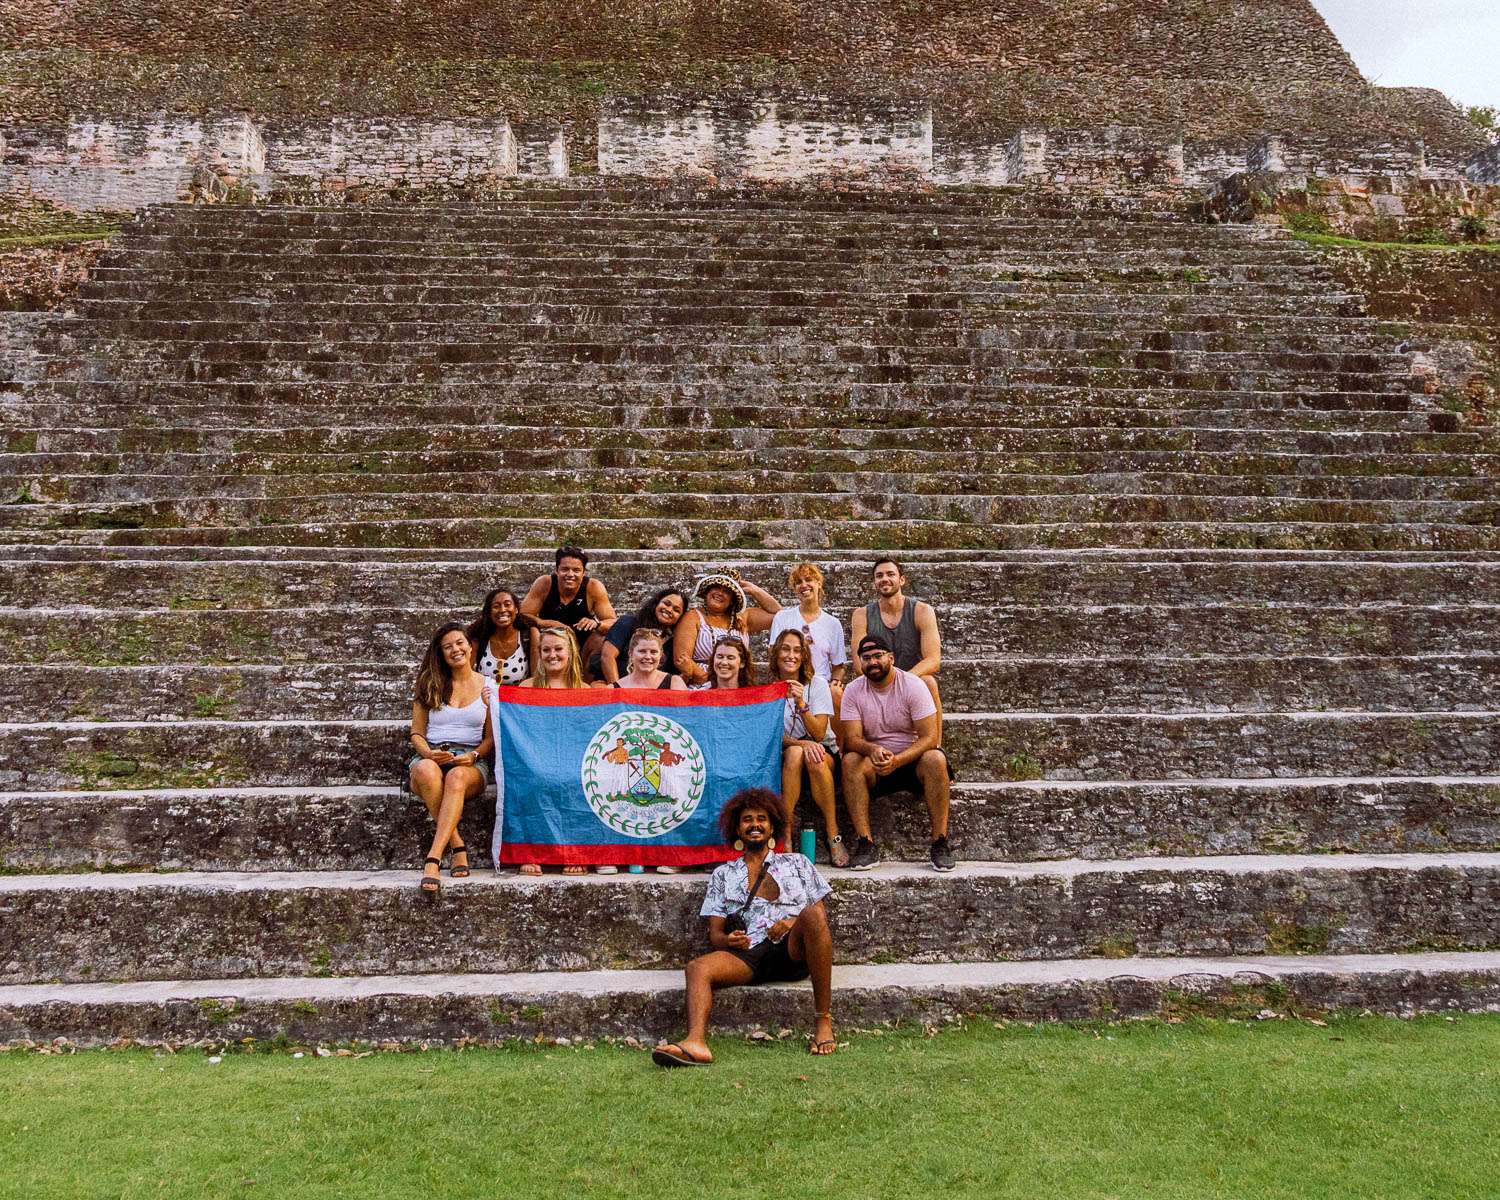 Rachel Off Duty: A Group of Travelers Posing with a Belize Flag at Xunantunich Mayan Ruins